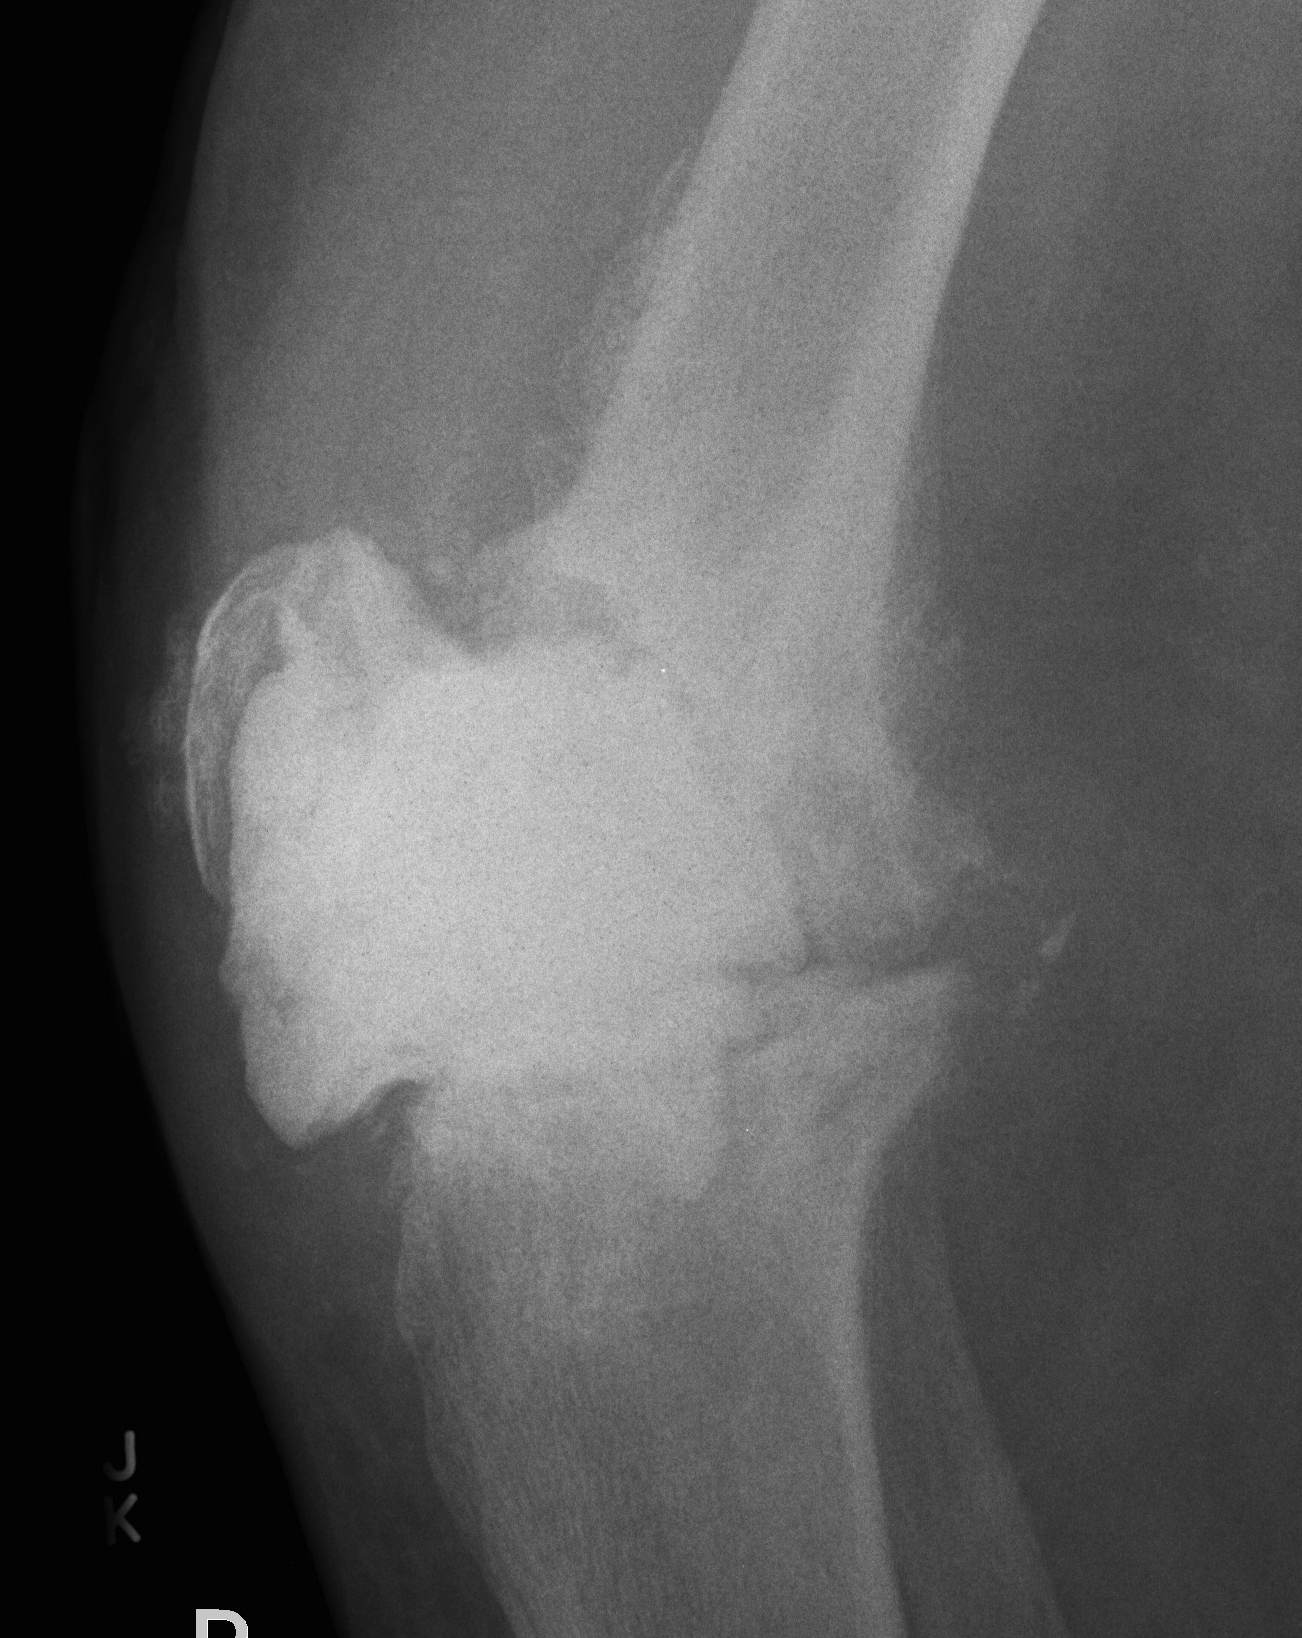 Infected TKR Cement Ball Lateral